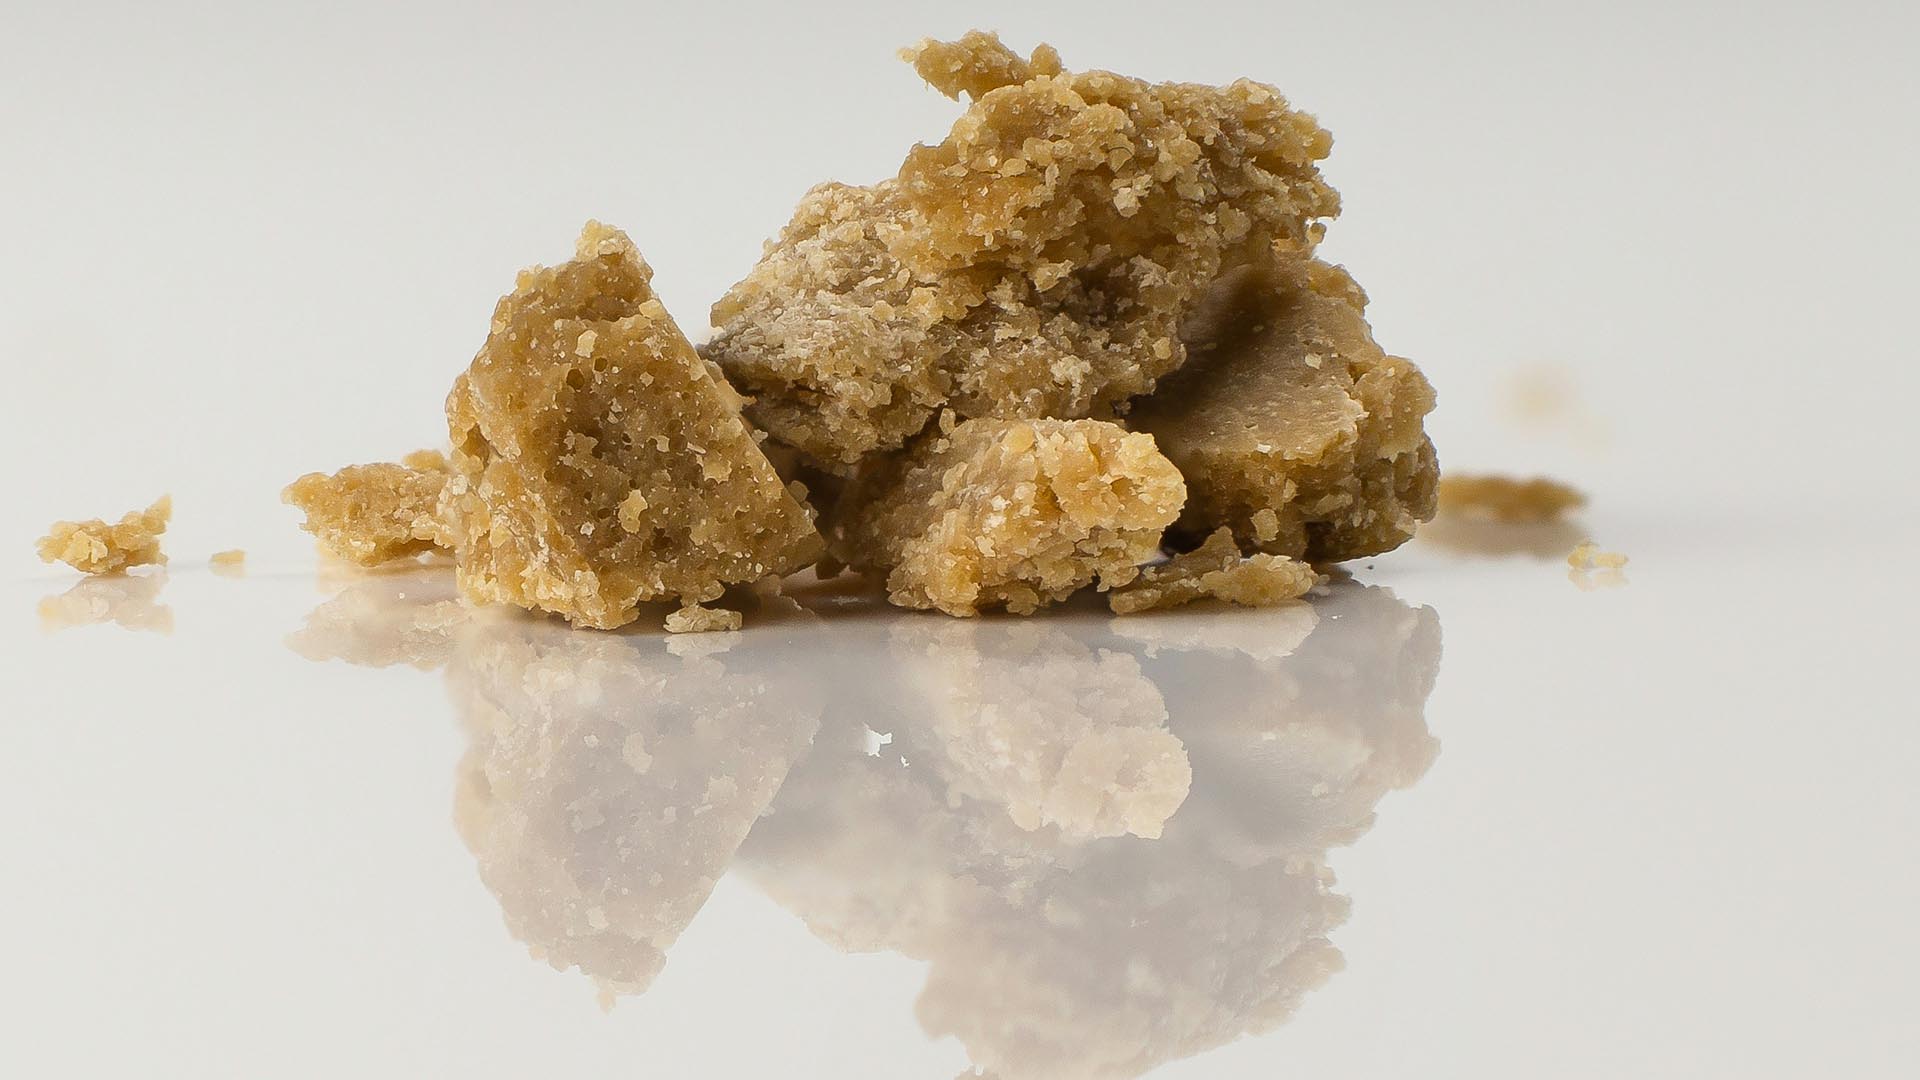 Crumble wax against a white background